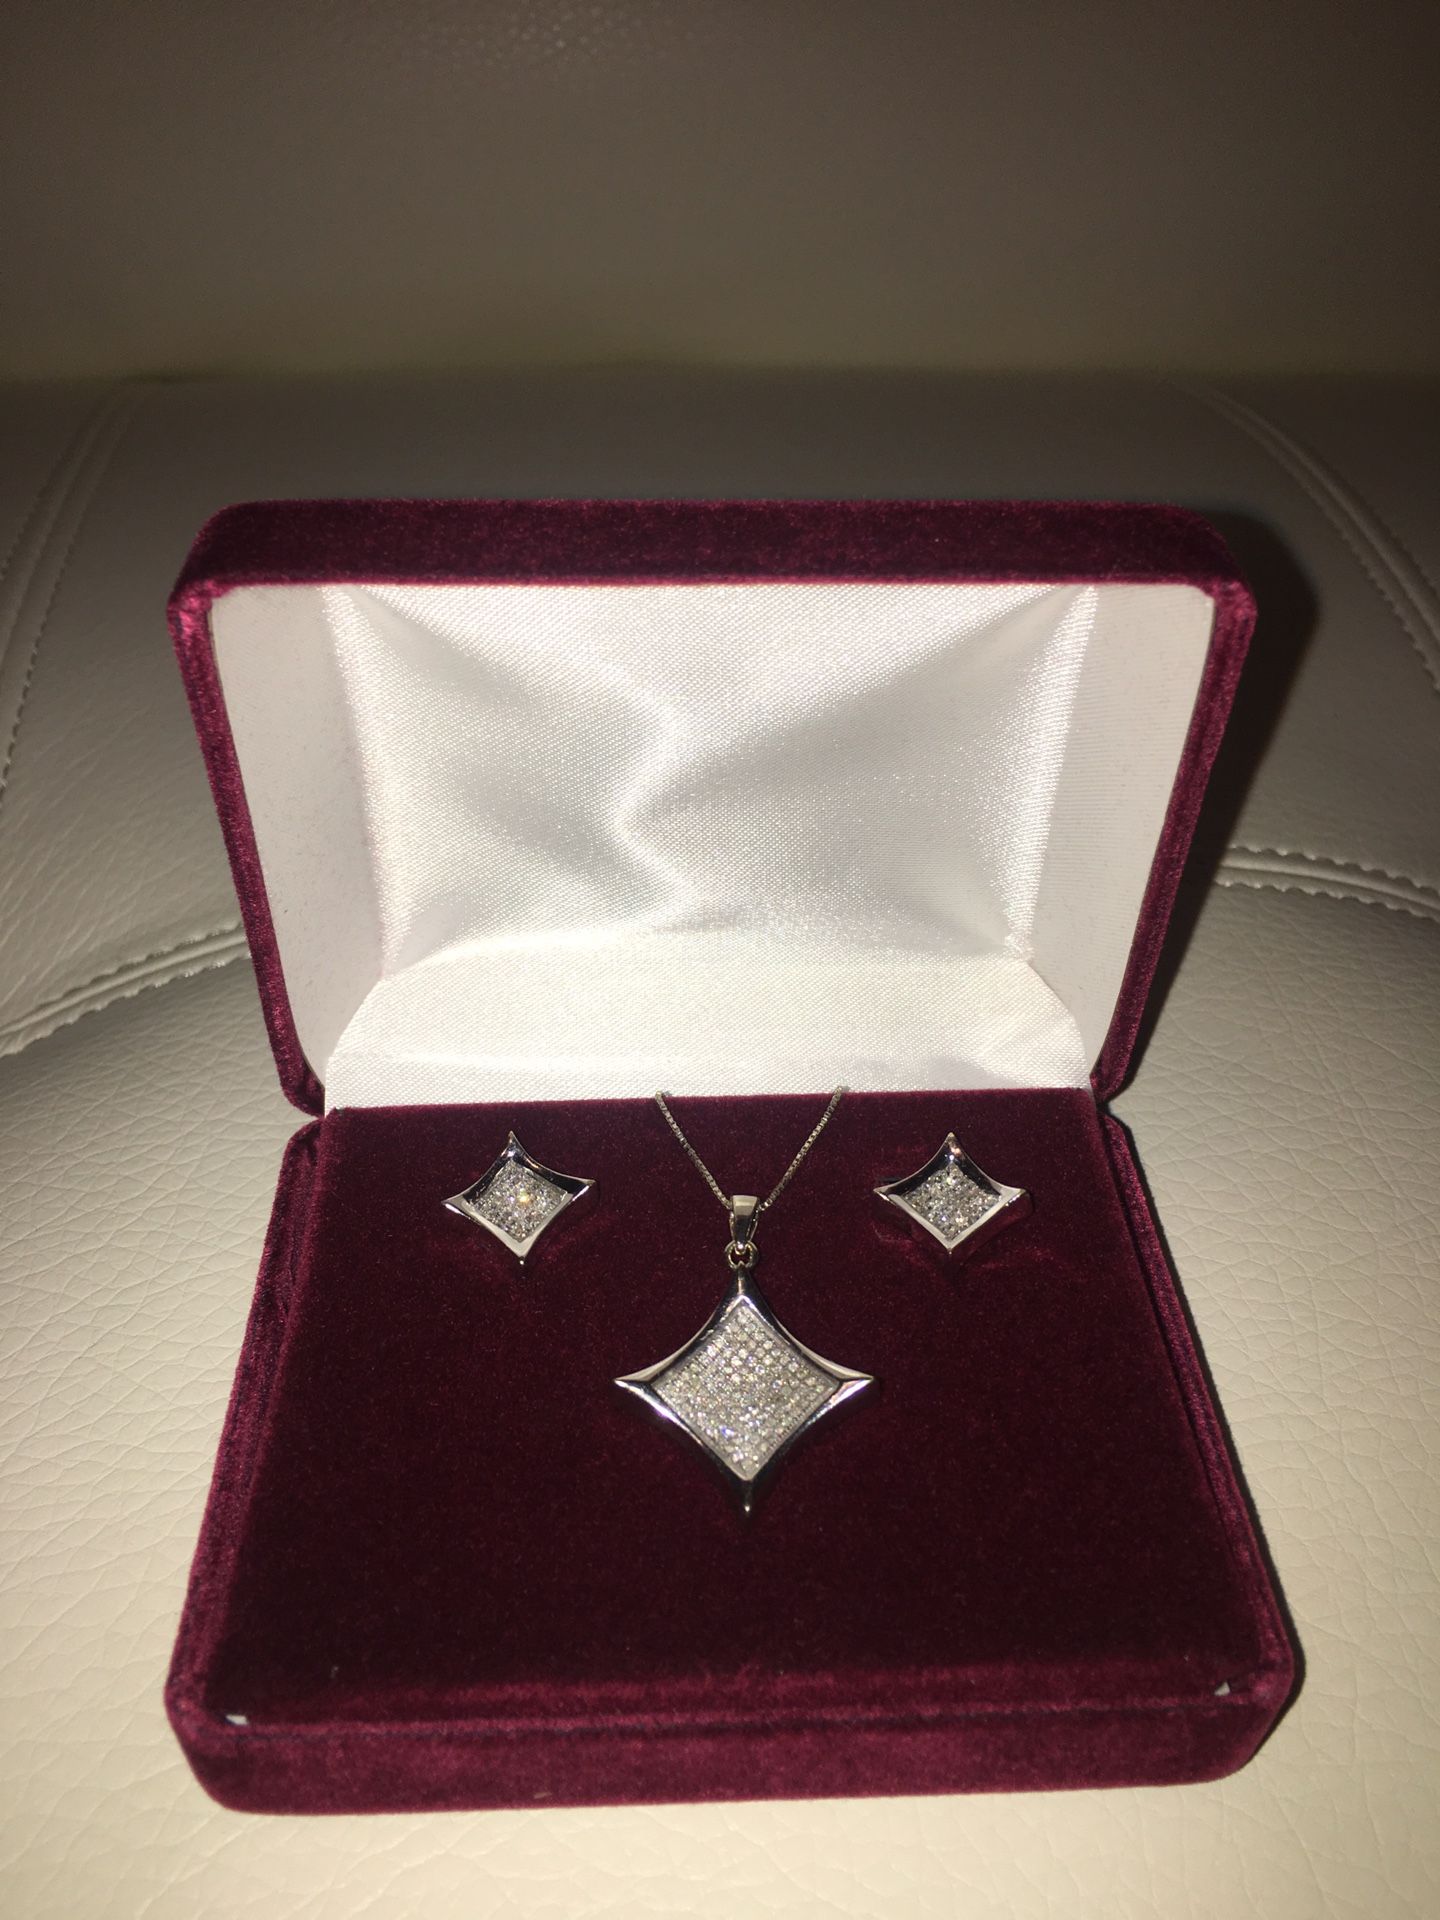 Authentic Diamond Princess Cut Necklace & Matching Earrings